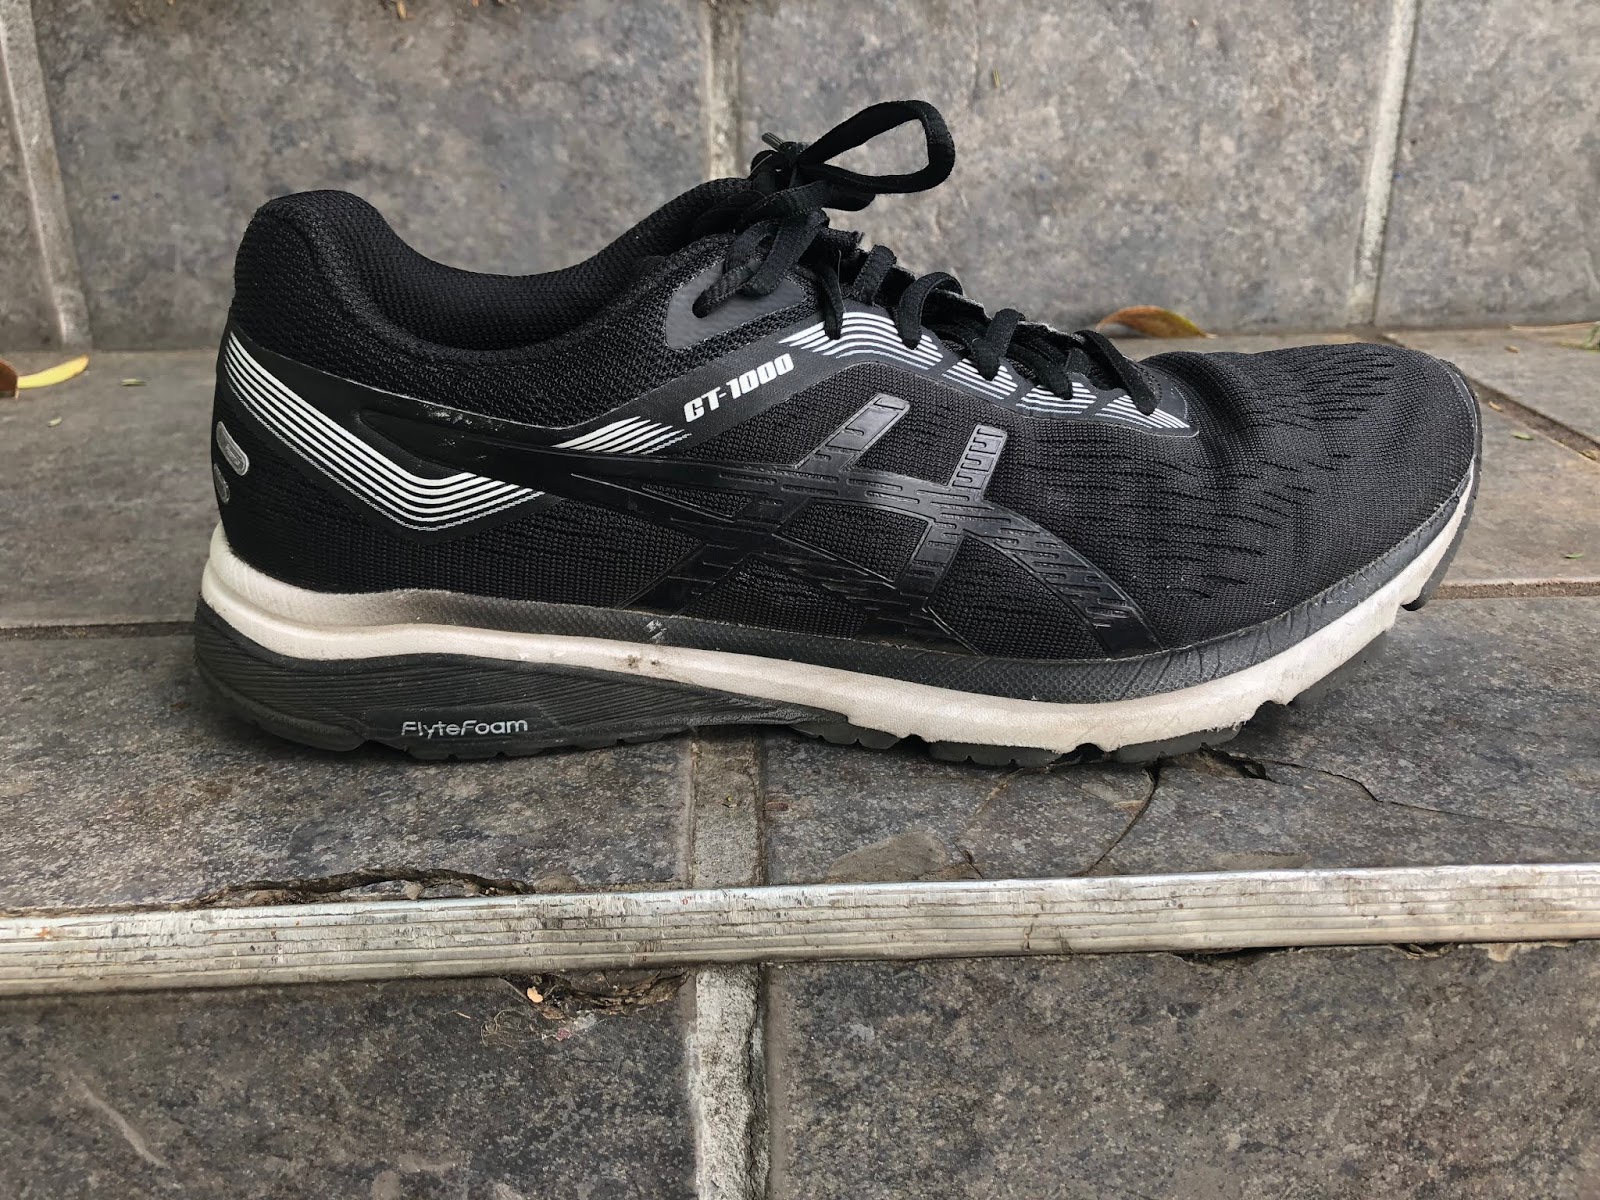 Asics GT 1000 7 Review - DOCTORS OF RUNNING